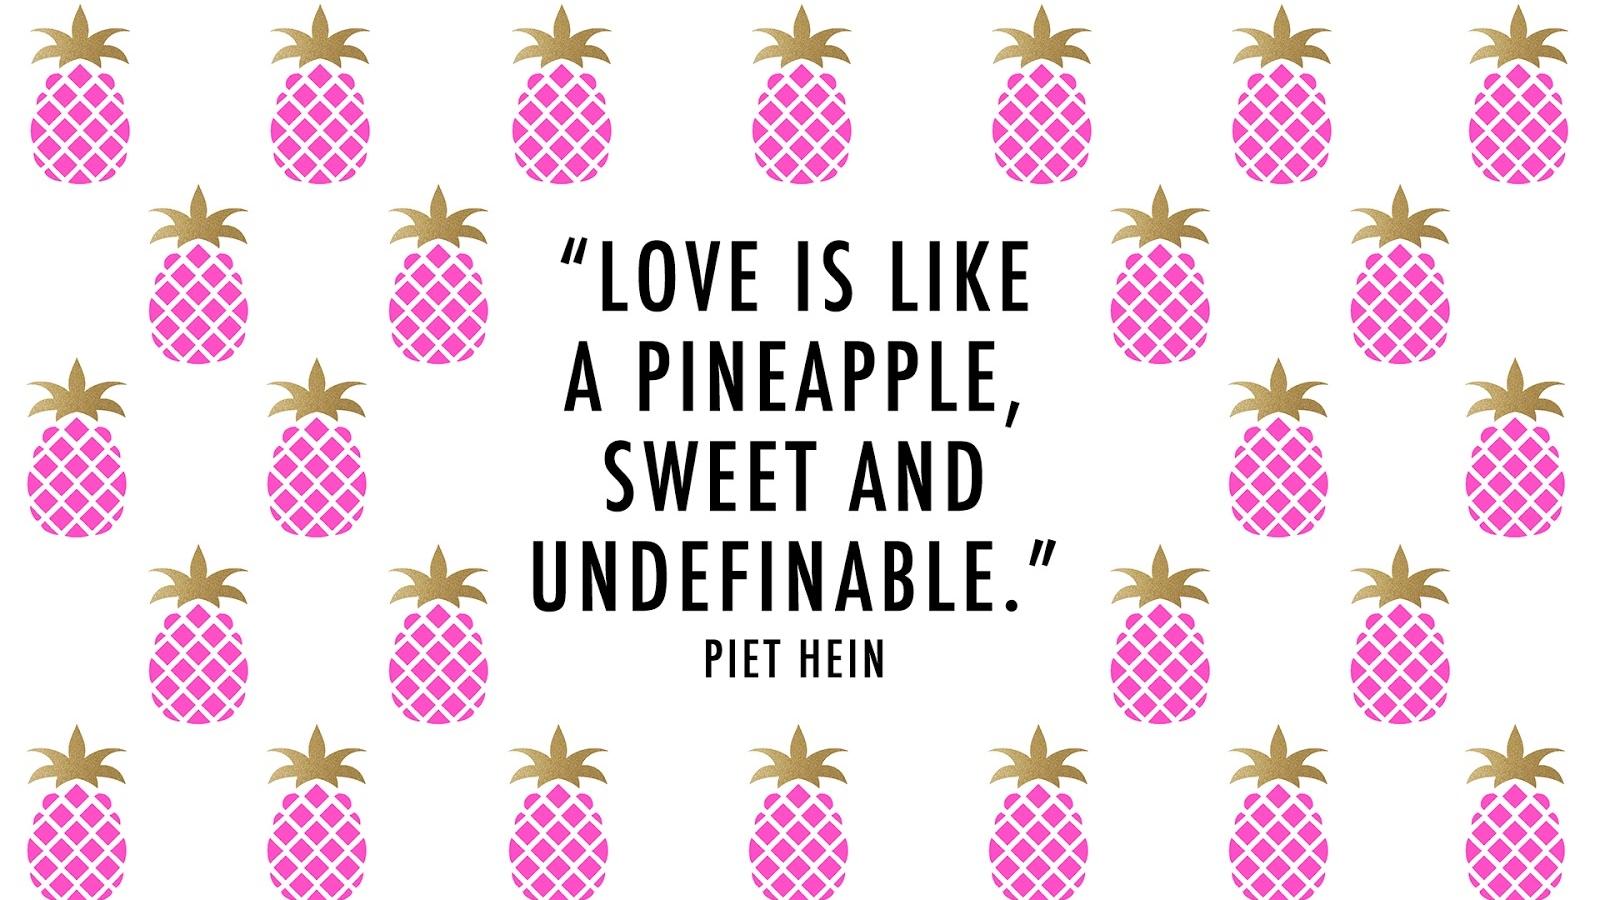 Pink Pineapple Wallpaper - Pineapple Wallpaper Iphone With Quote , HD Wallpaper & Backgrounds